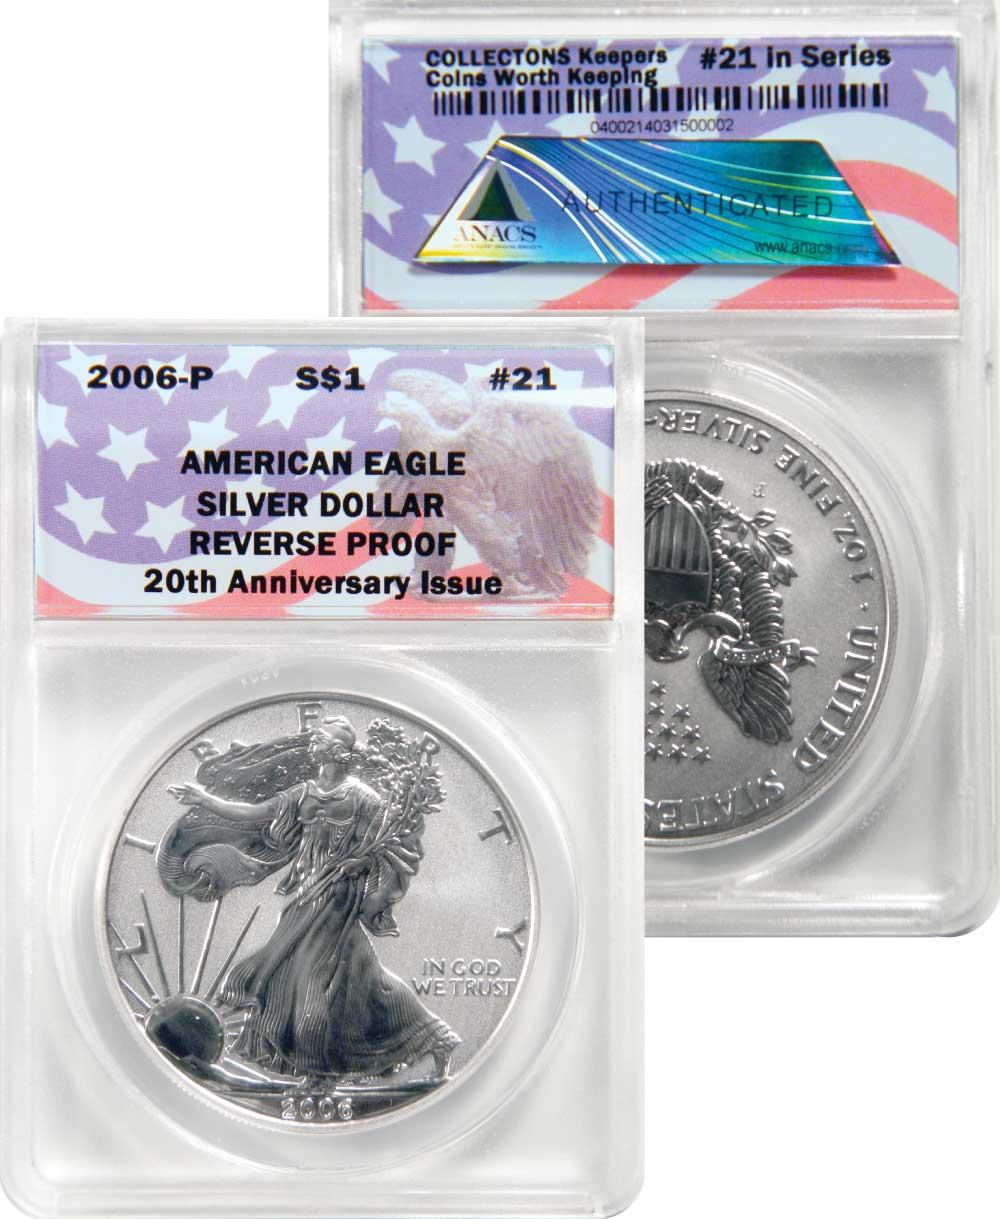 CollecTons Keepers #21: 2006-P Reverse Proof American Eagle Silver Dollar Certified in Exclusive ANACS Holder